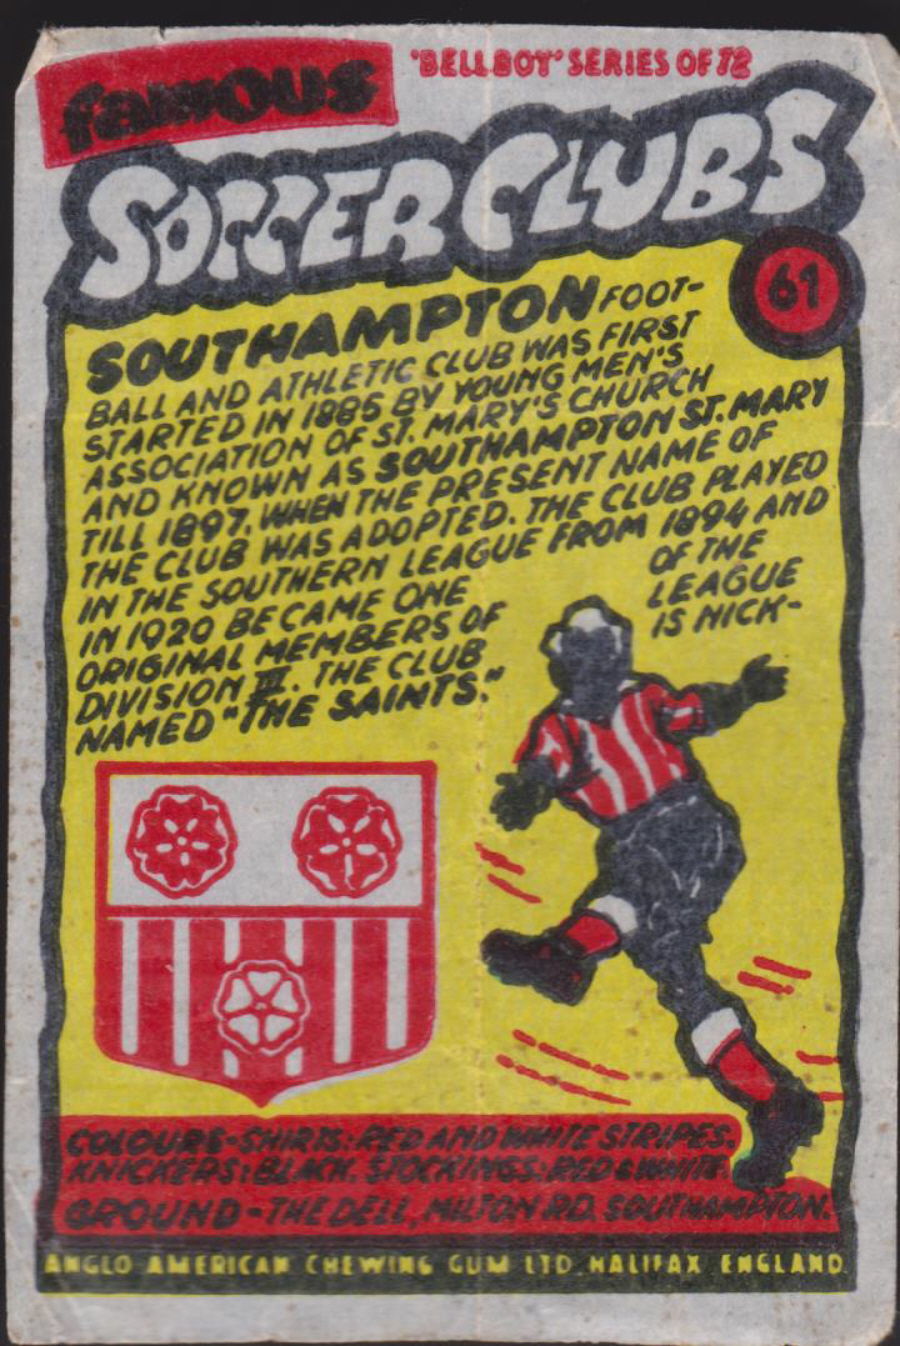 Anglo-American-Chewing-Gum-Wax-Wrapper-Famous-Soccer-Clubs-No-61 - Southampton - Click Image to Close